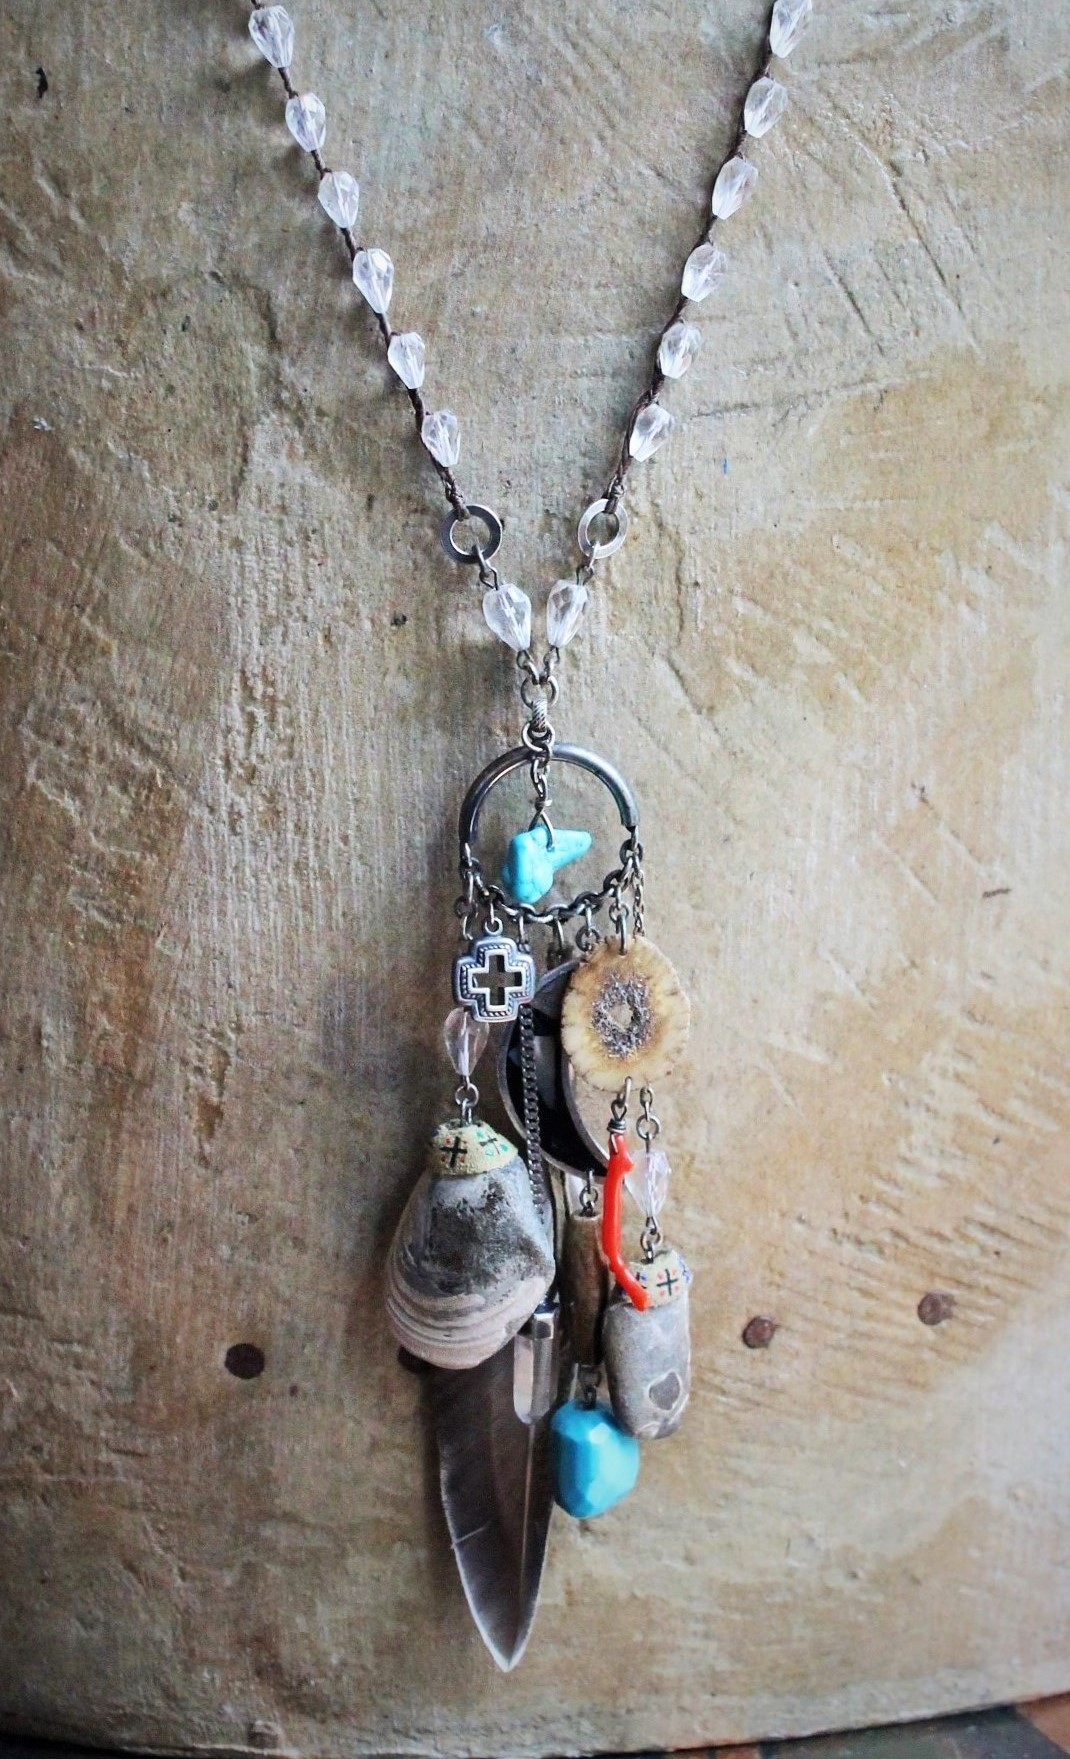 Layaway for L The 4 Elements Amulet Necklace w/Hand Crocheted Rock Crystal Bead Chain, Ancient Shell Fossils,Antique Sterling Inlay Crescent Moon,Rare Faceted Turquoise Nugget,Sterling 4 Way Cross & More!